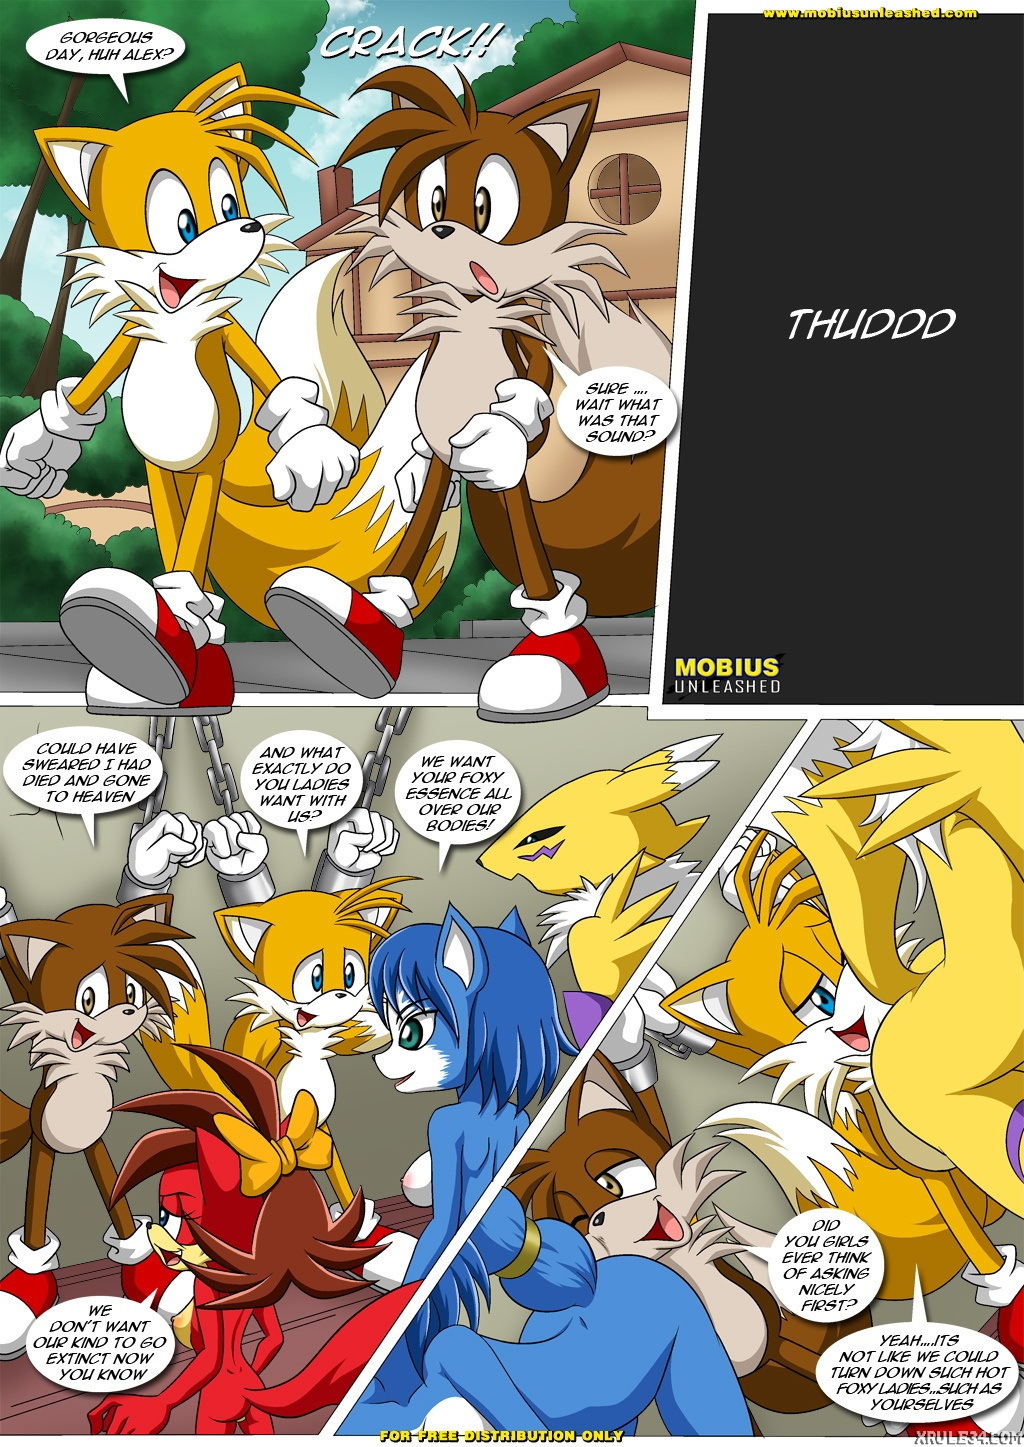 Foxxxes^2 - 2 Much Tail - Page 2